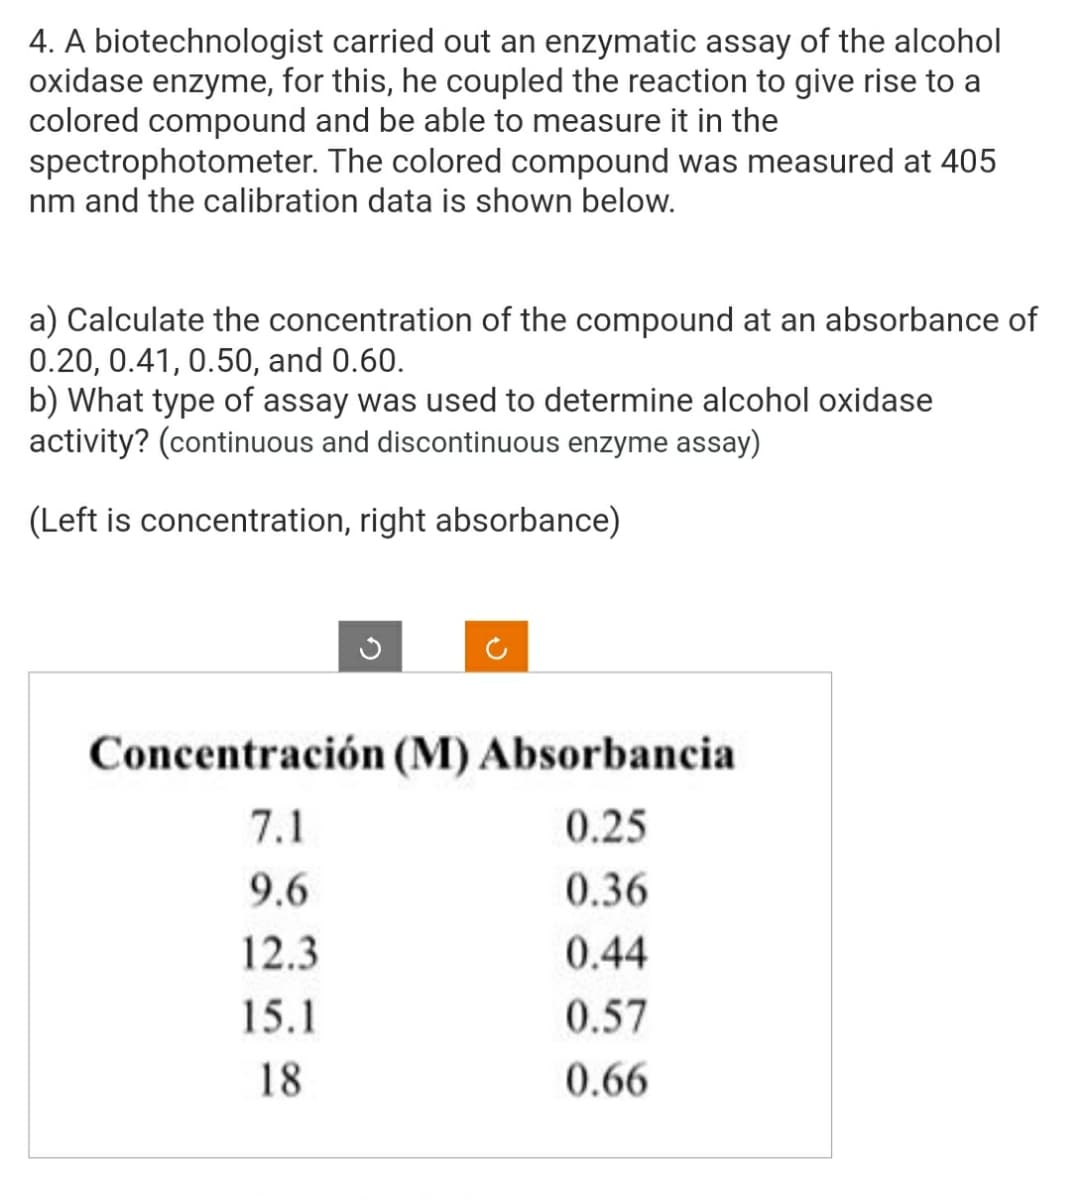 4. A biotechnologist carried out an enzymatic assay of the alcohol
oxidase enzyme, for this, he coupled the reaction to give rise to a
colored compound and be able to measure it in the
spectrophotometer. The colored compound was measured at 405
nm and the calibration data is shown below.
a) Calculate the concentration of the compound at an absorbance of
0.20, 0.41, 0.50, and 0.60.
b) What type of assay was used to determine alcohol oxidase
activity? (continuous and discontinuous enzyme assay)
(Left is concentration, right absorbance)
Concentración (M) Absorbancia
0.25
0.36
0.44
0.57
0.66
7.1
9.6
12.3
15.1
18